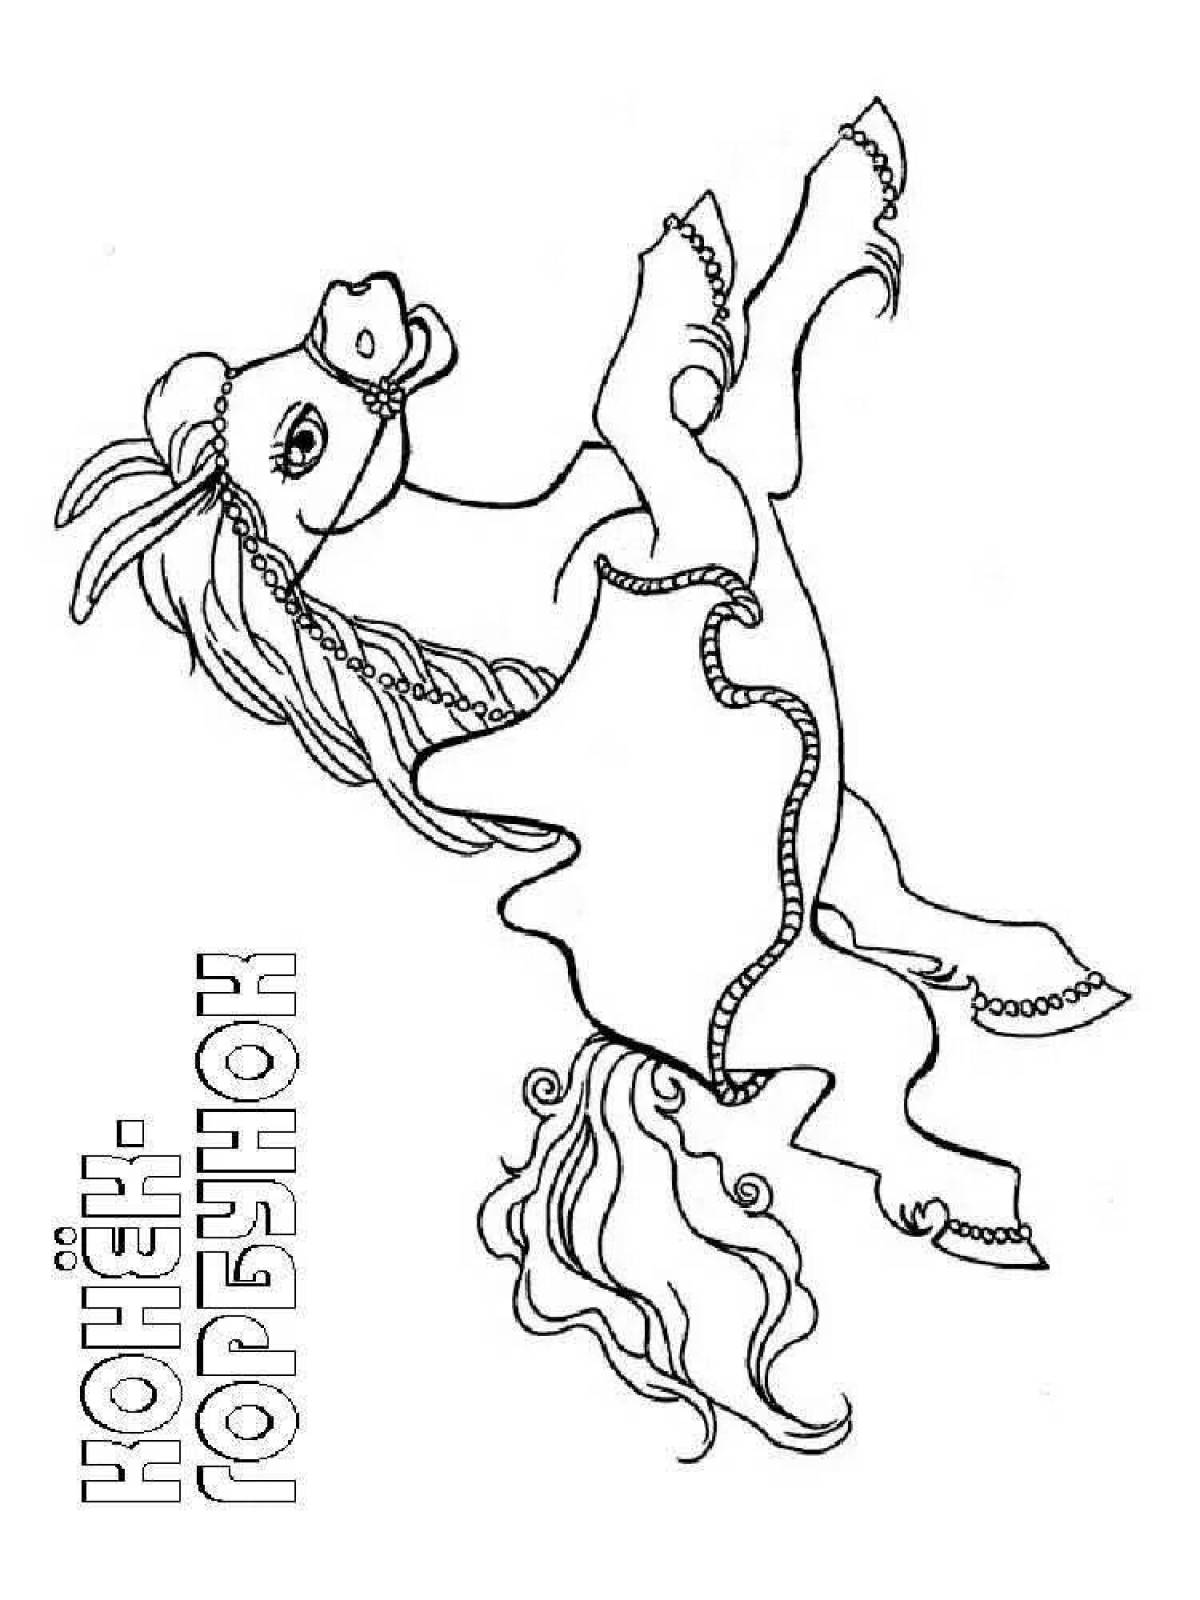 Radiant humpbacked horse coloring page